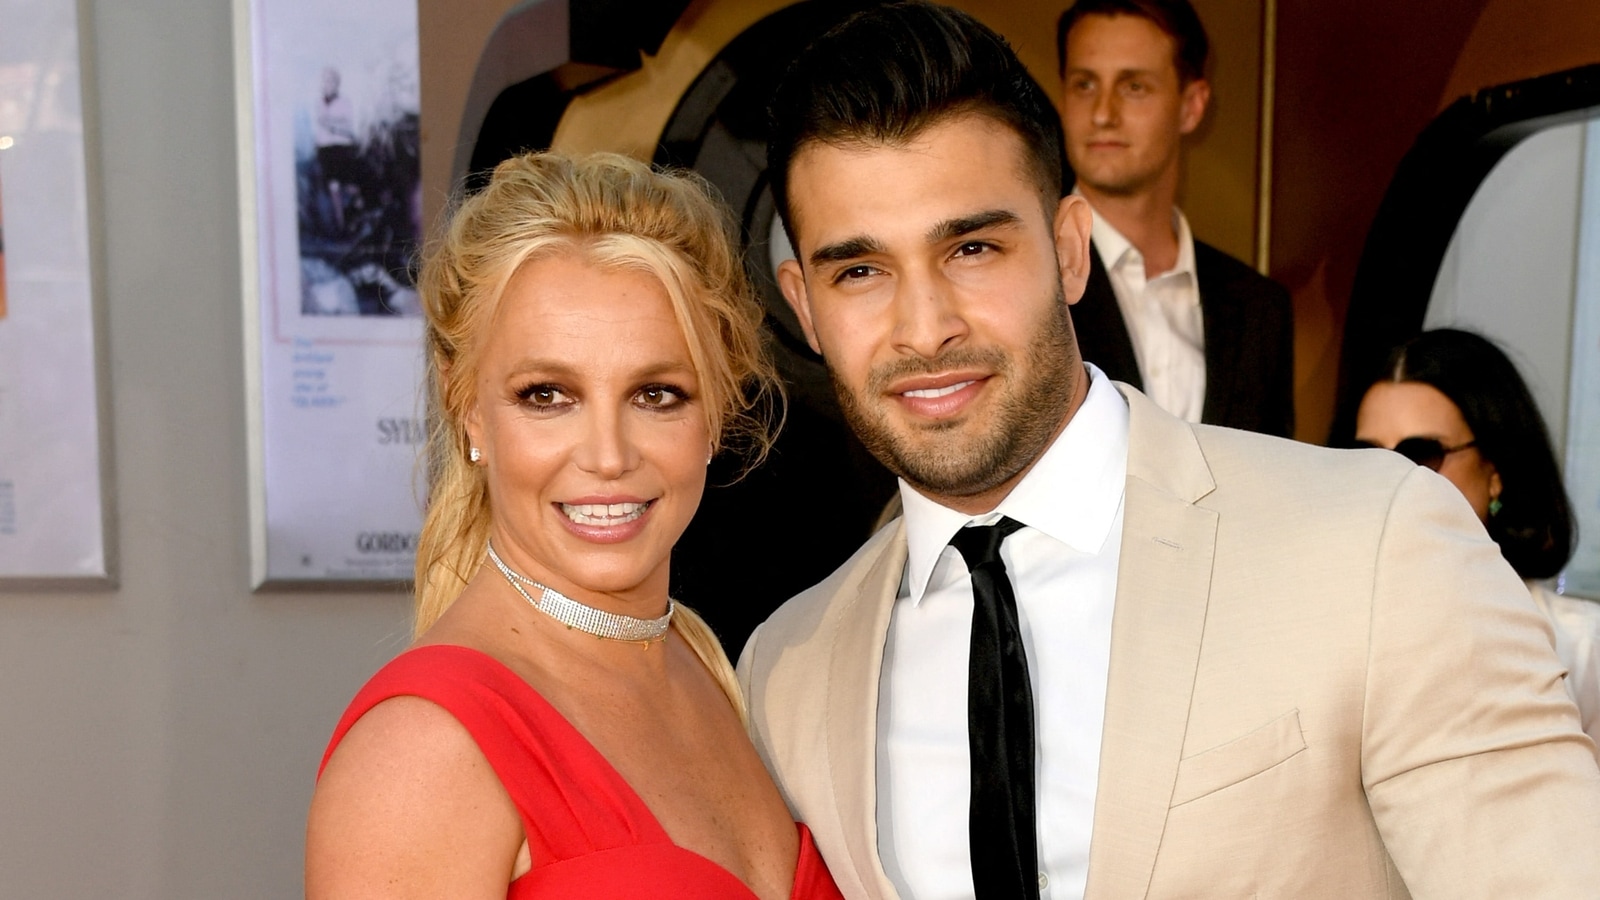 Britney Spears announces miscarriage with heartbreaking note, says she and Sam Asghari lost their ‘miracle baby’